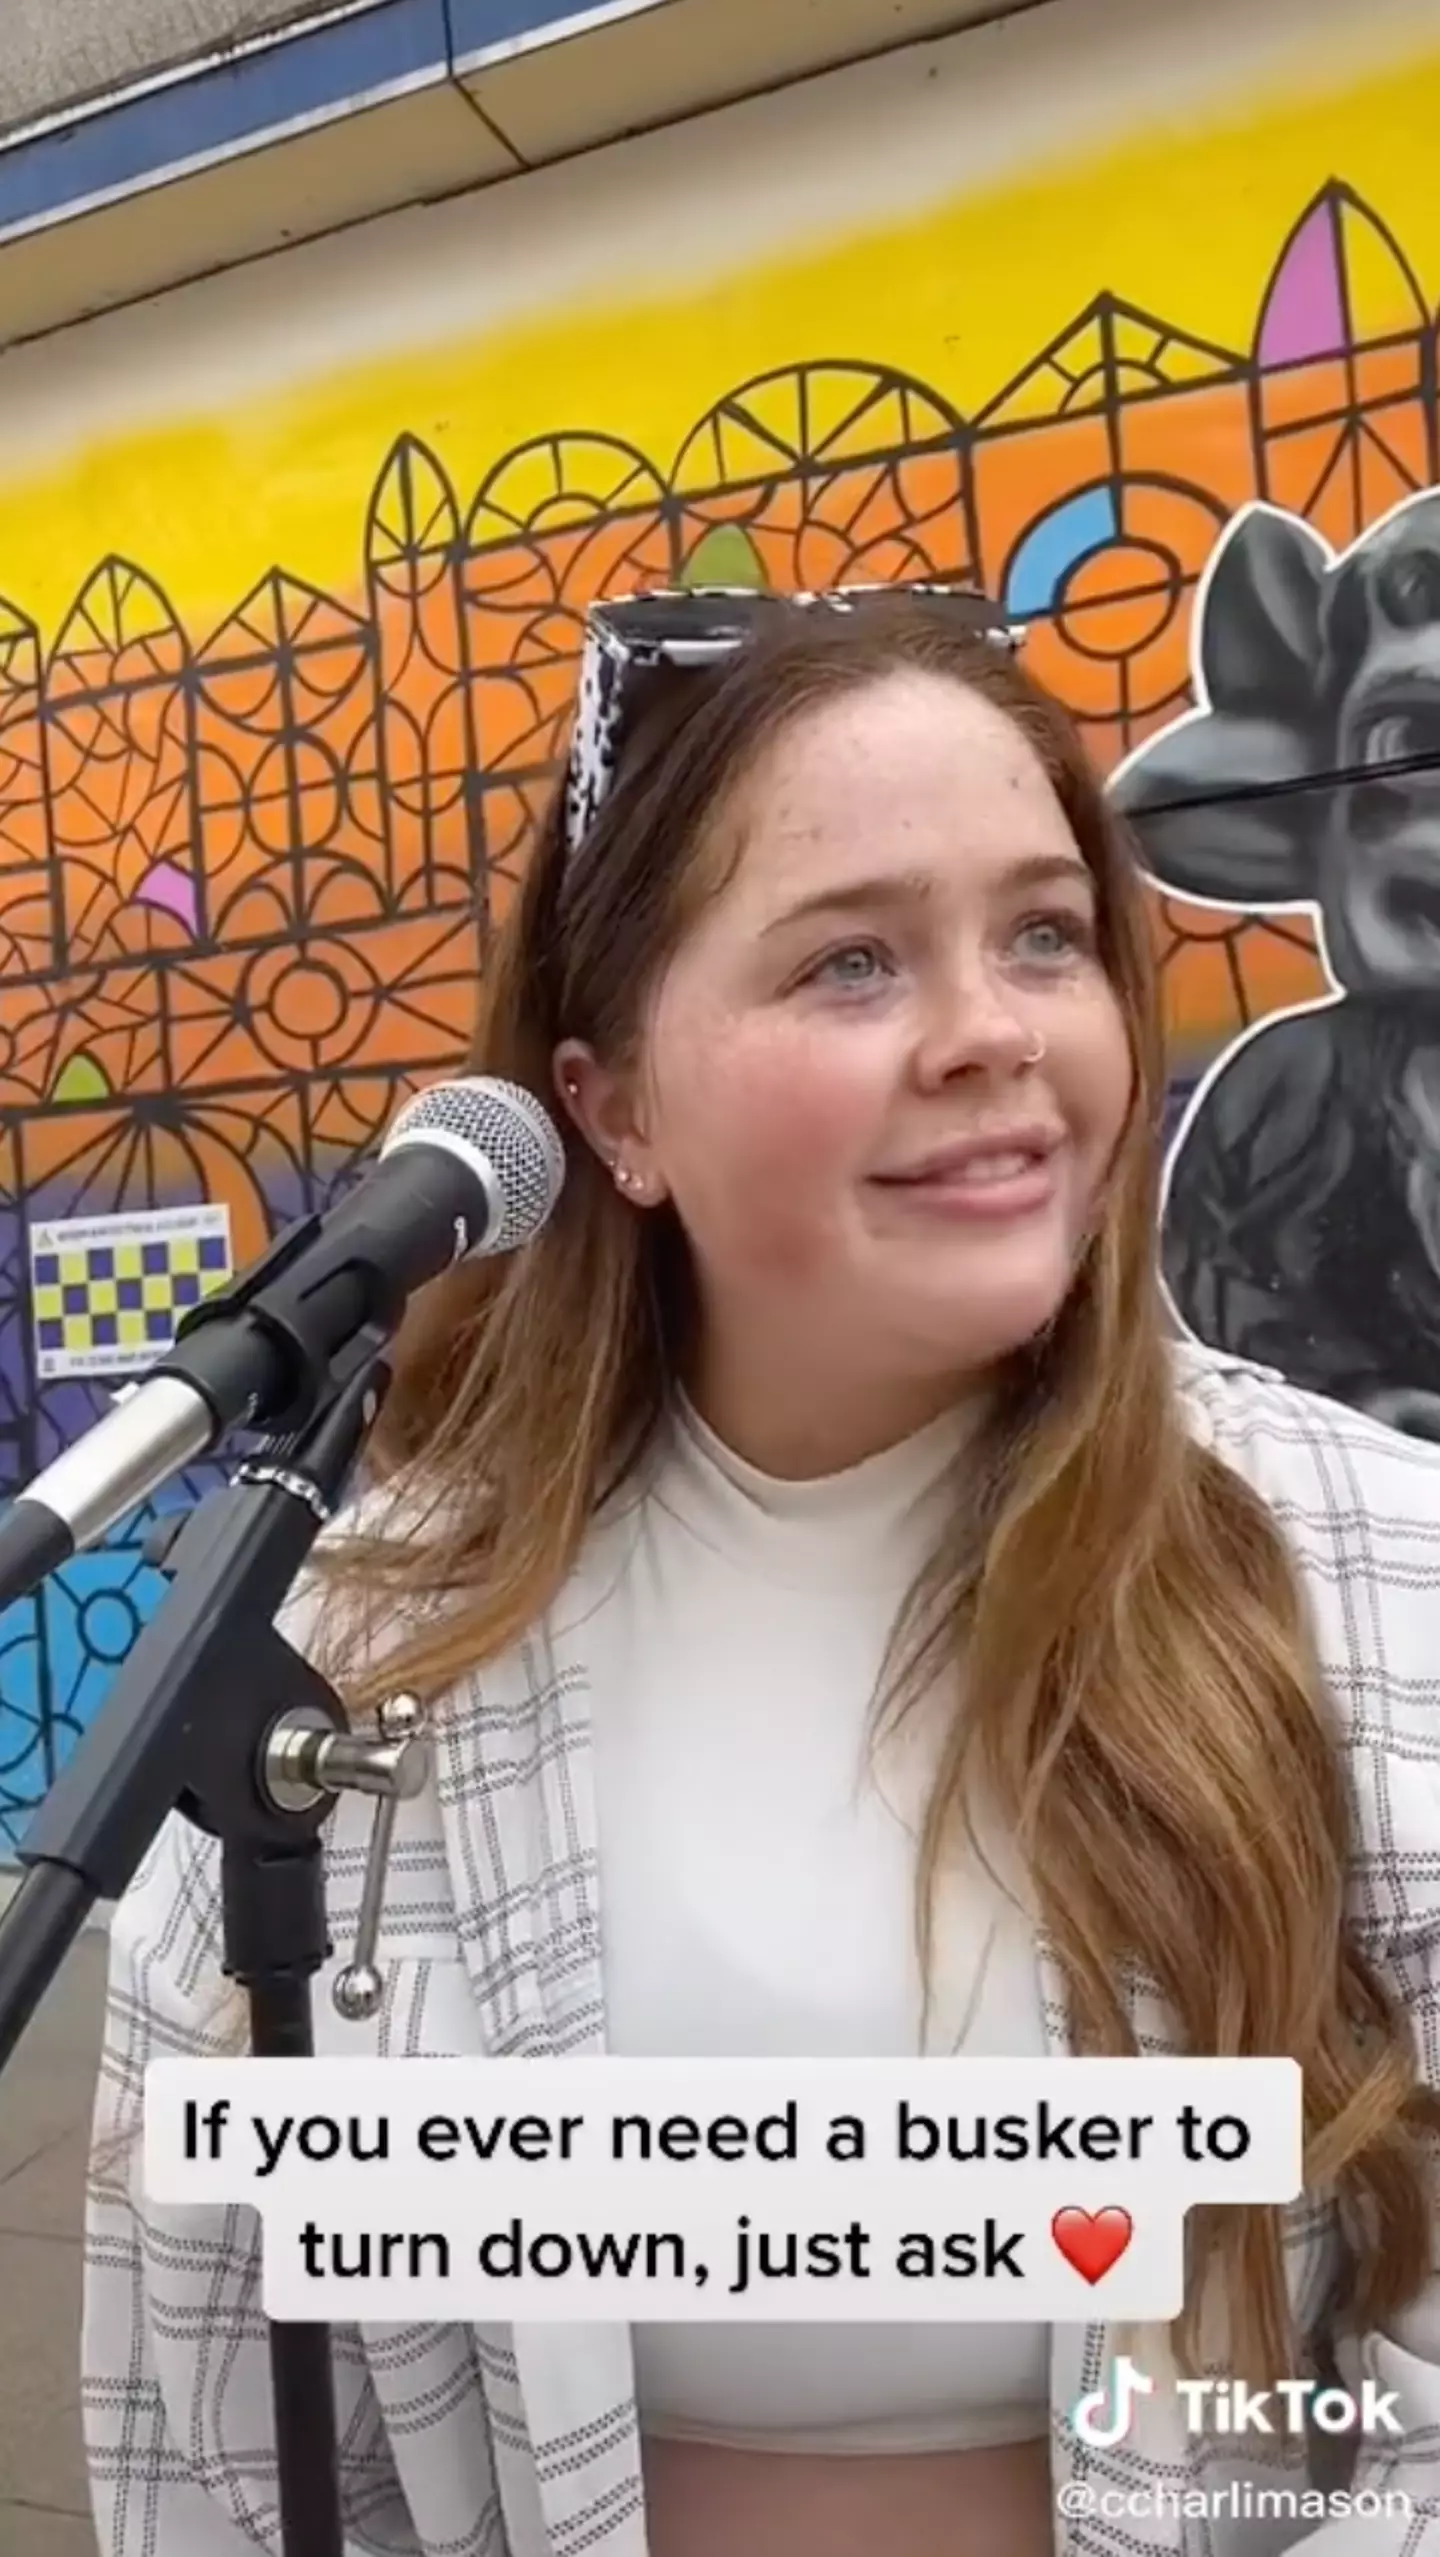 The busker explained she's always more than happy to turn down her music if people ask.